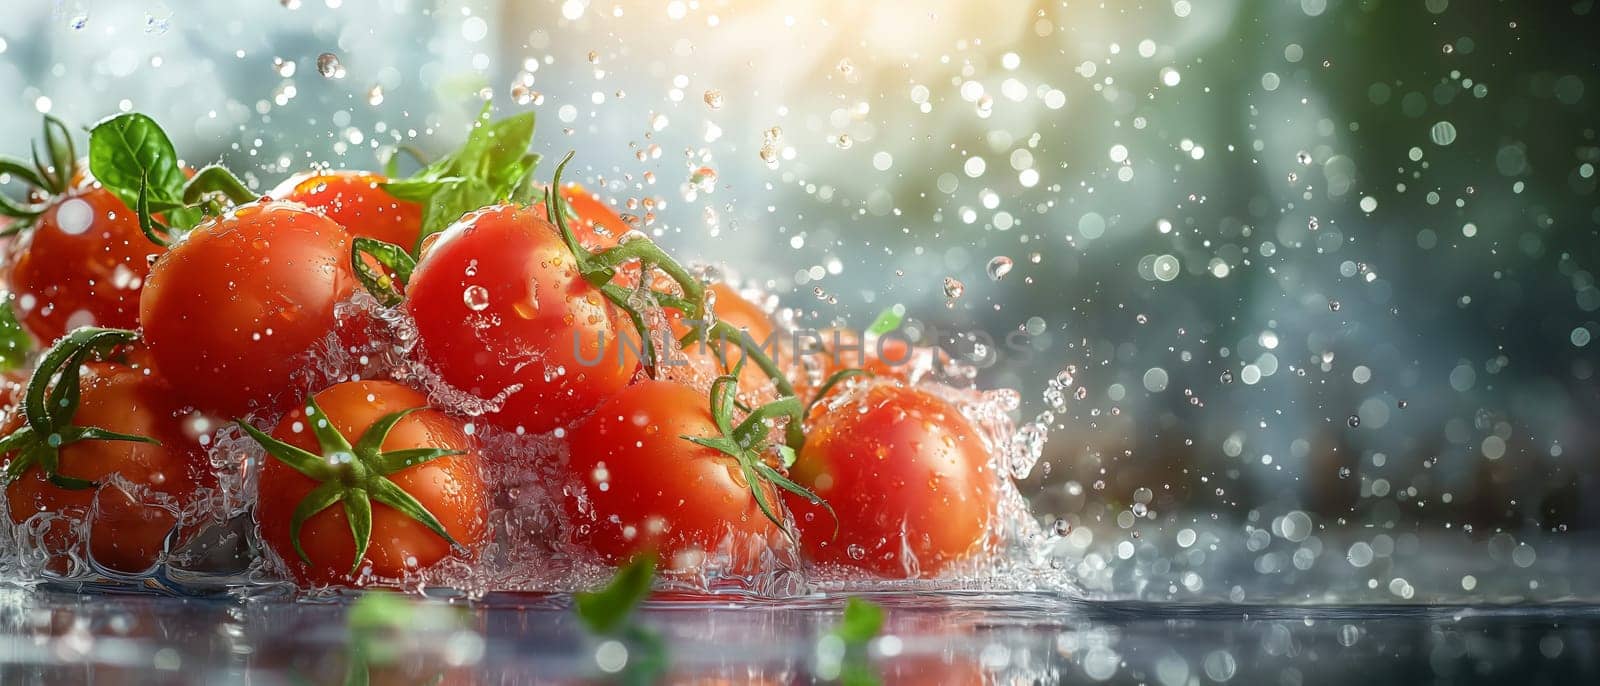 Water Splashes on Tomatoes. Selective focus.